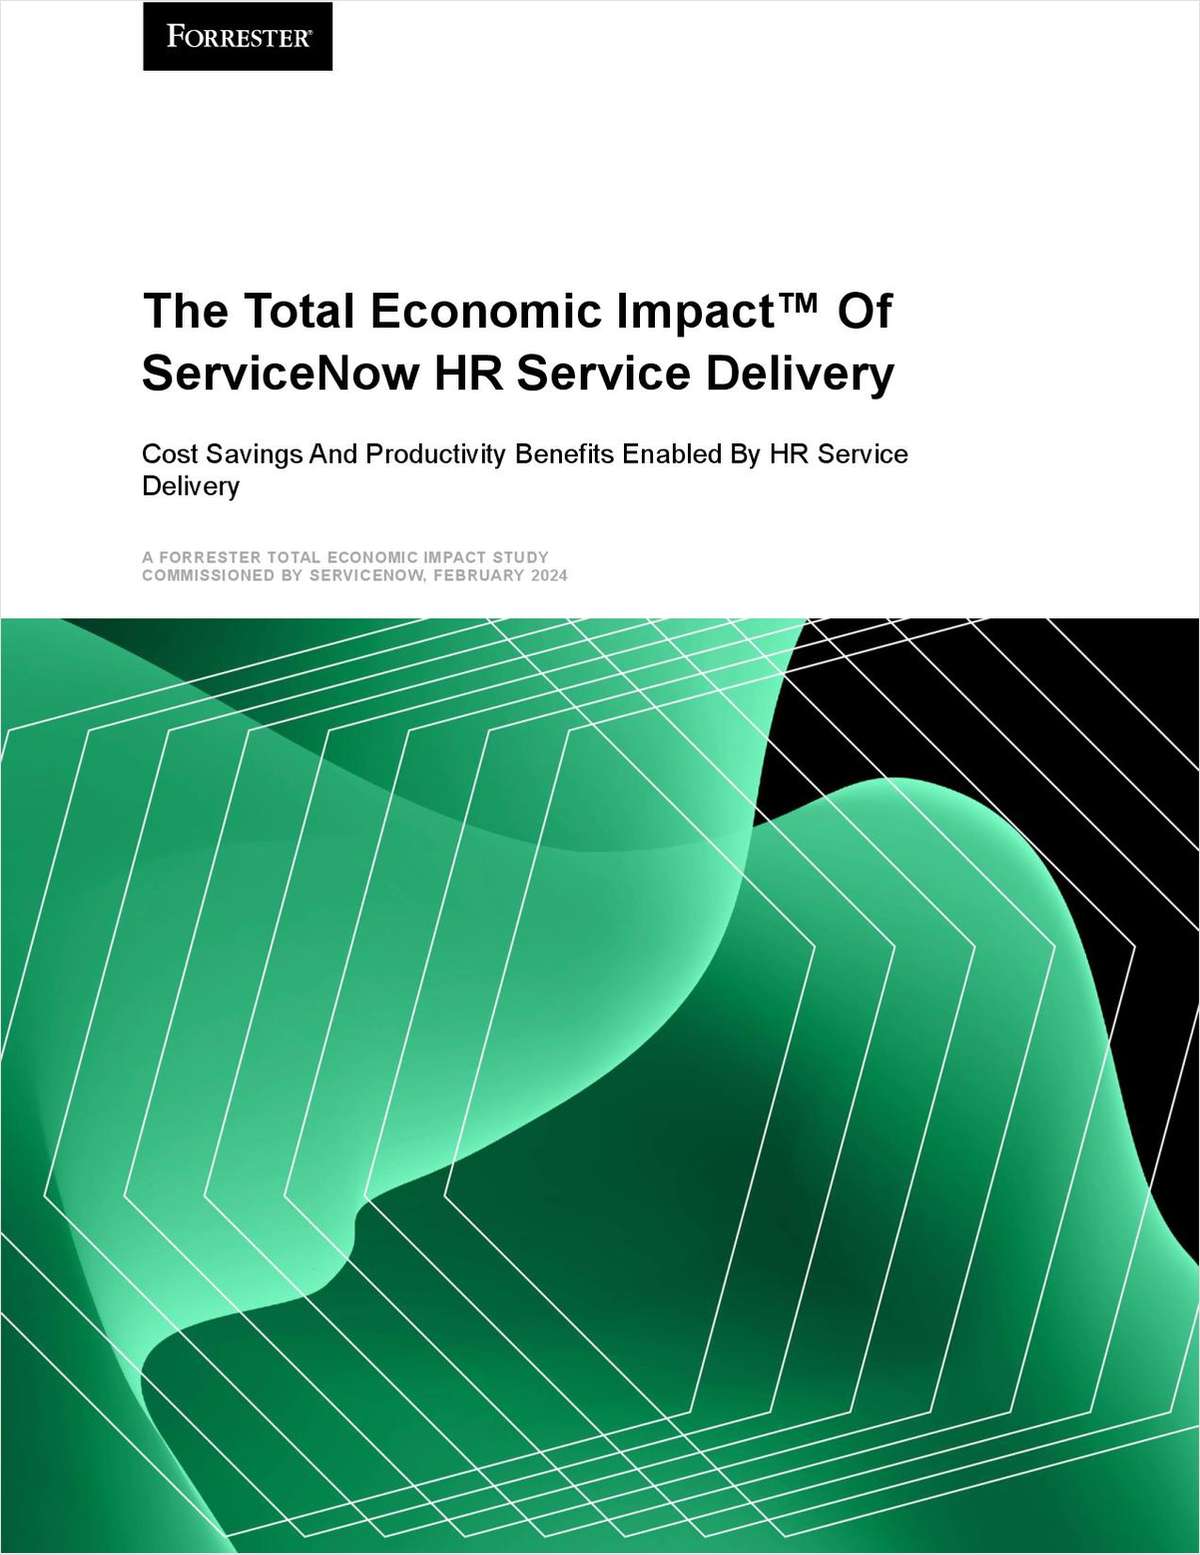 The Total Economic Impact™ of ServiceNow HR Service Delivery